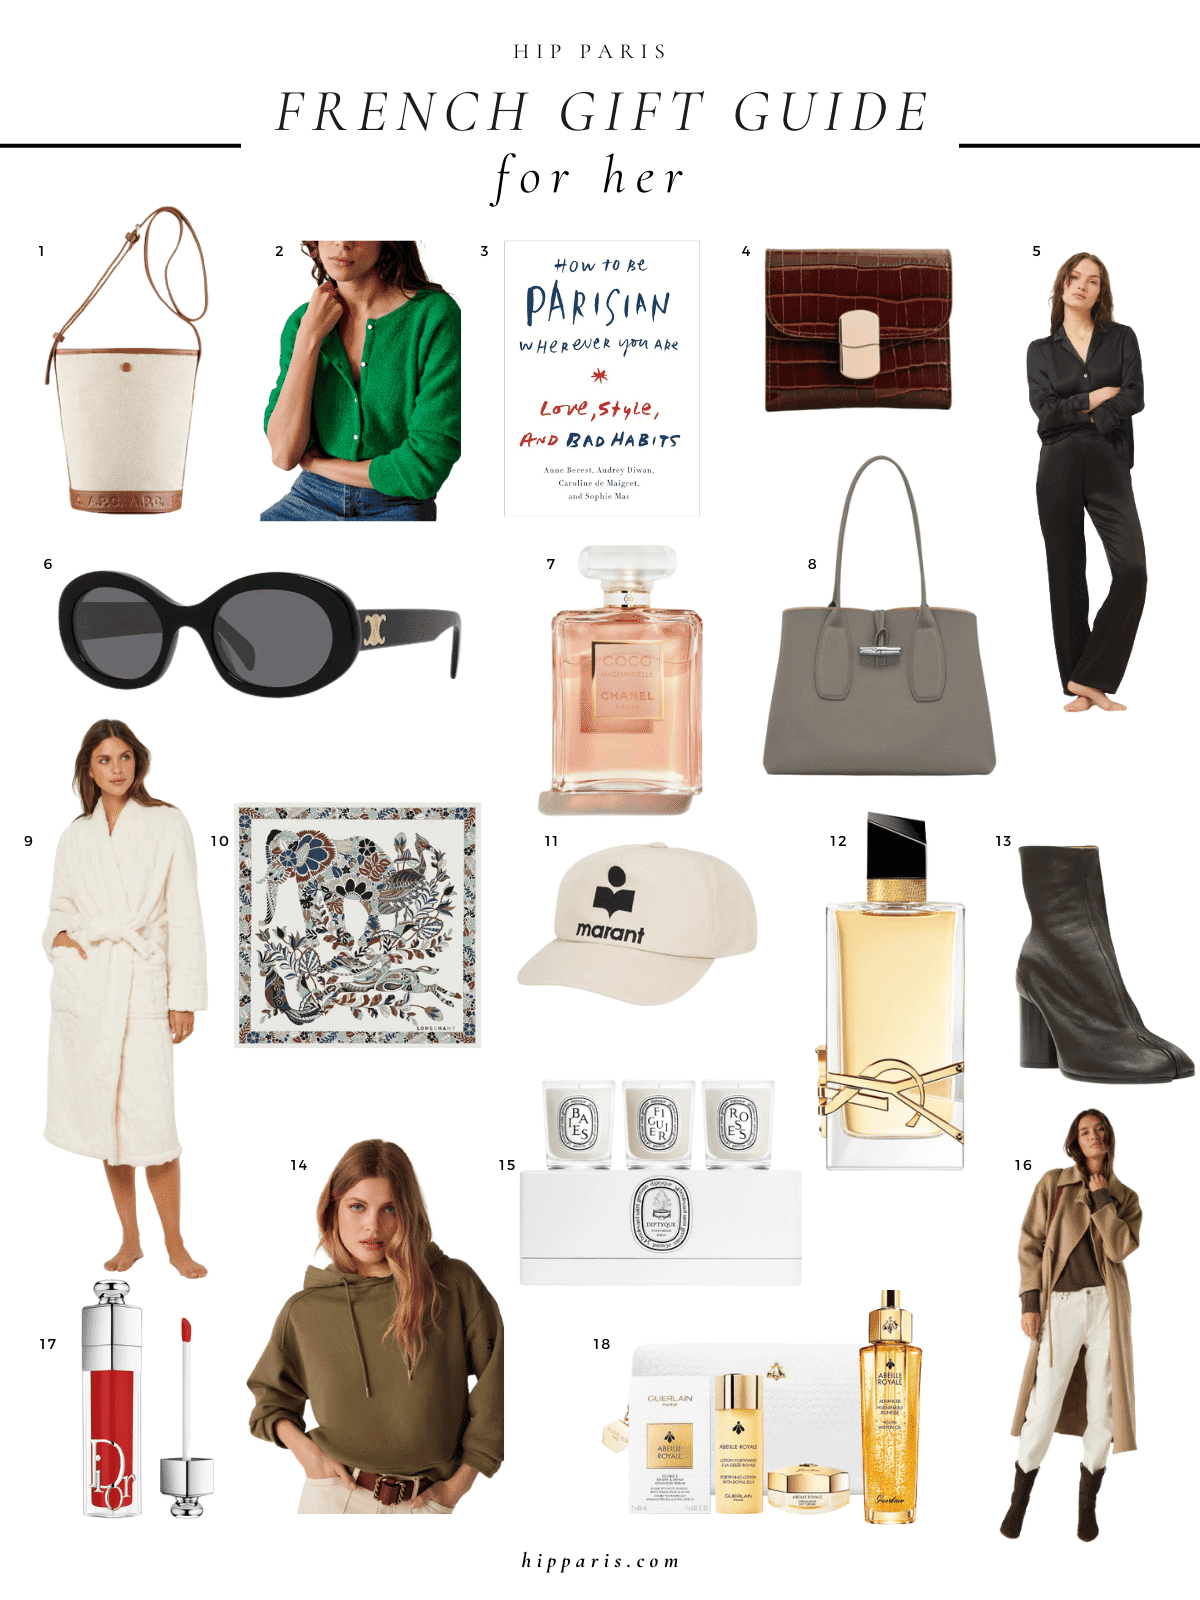 A selection of gifts for women from French brands curated by HIP Paris.